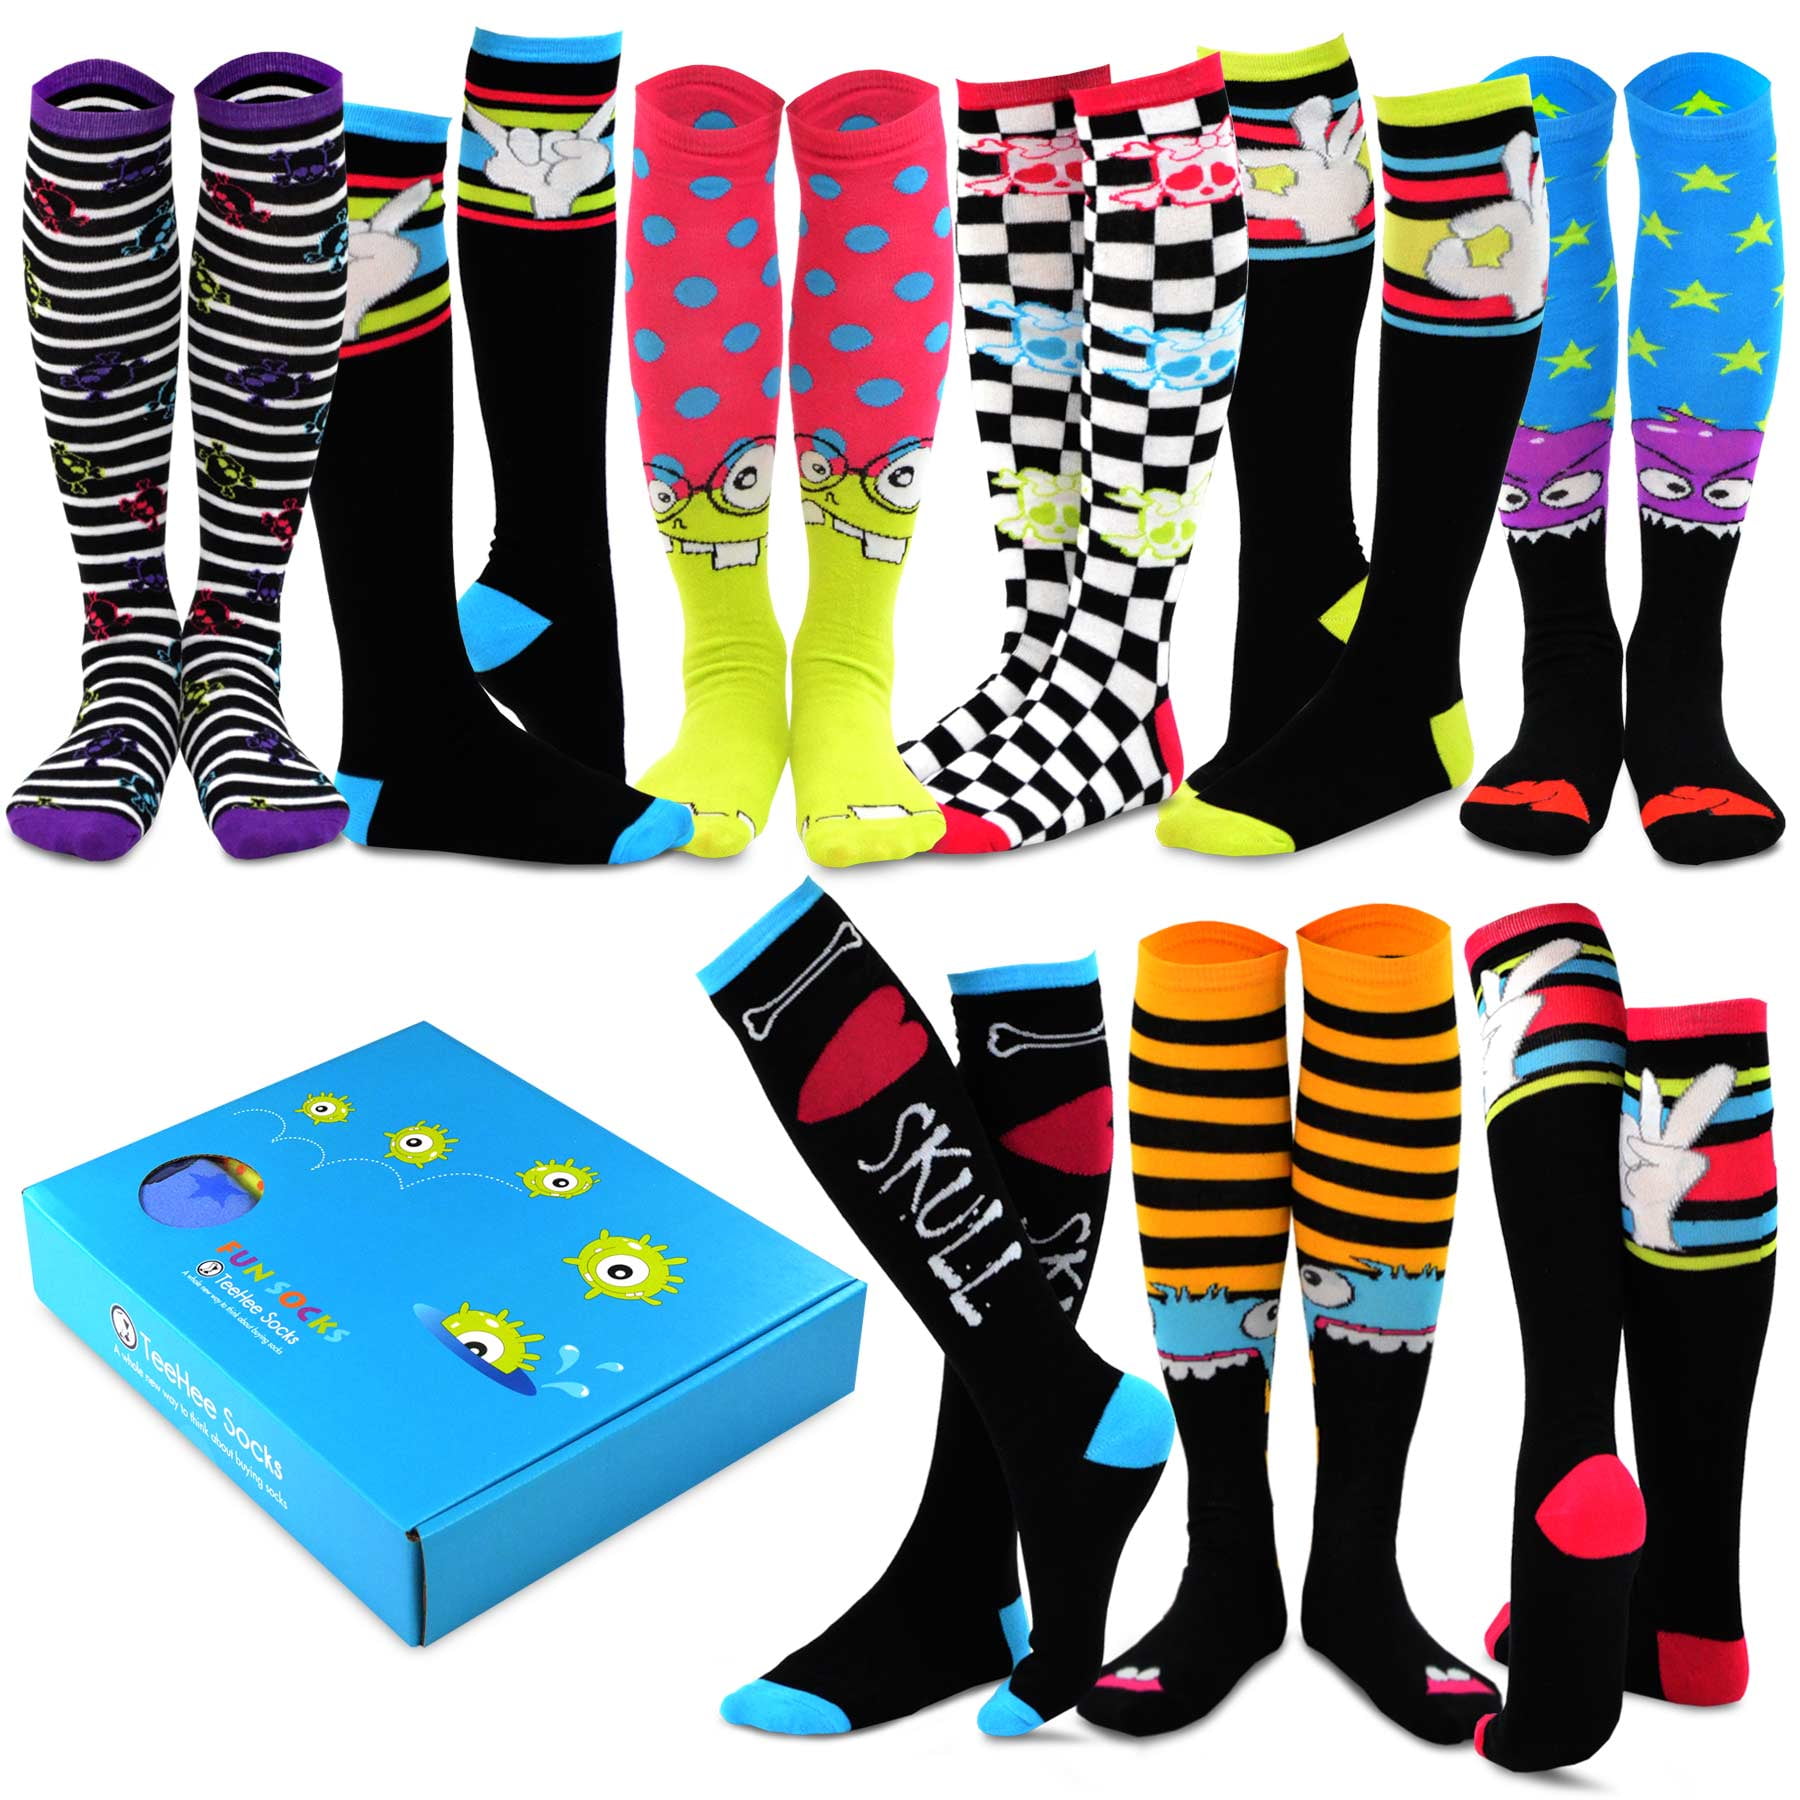 Holiday TeeHee Special Women Knee High 9-Pair Pack Socks with Gift Box